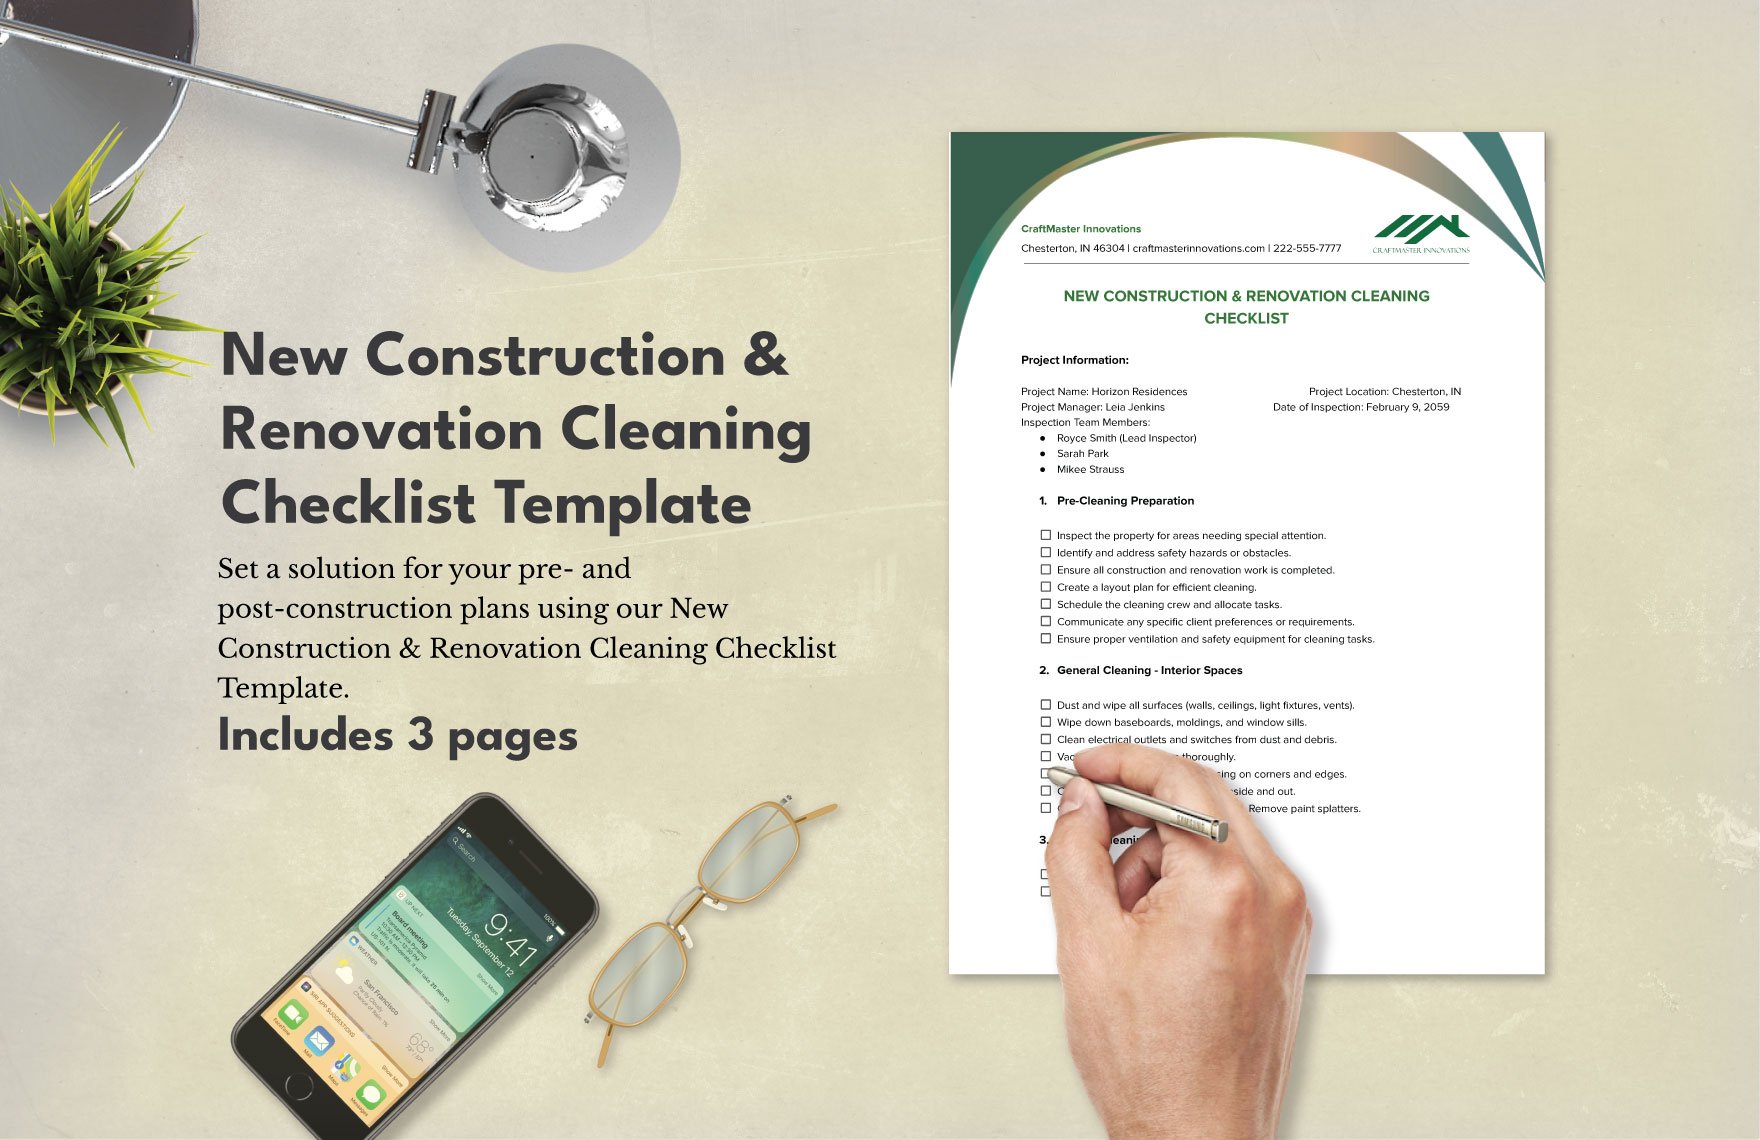 New Construction & Renovation Cleaning Checklist Template